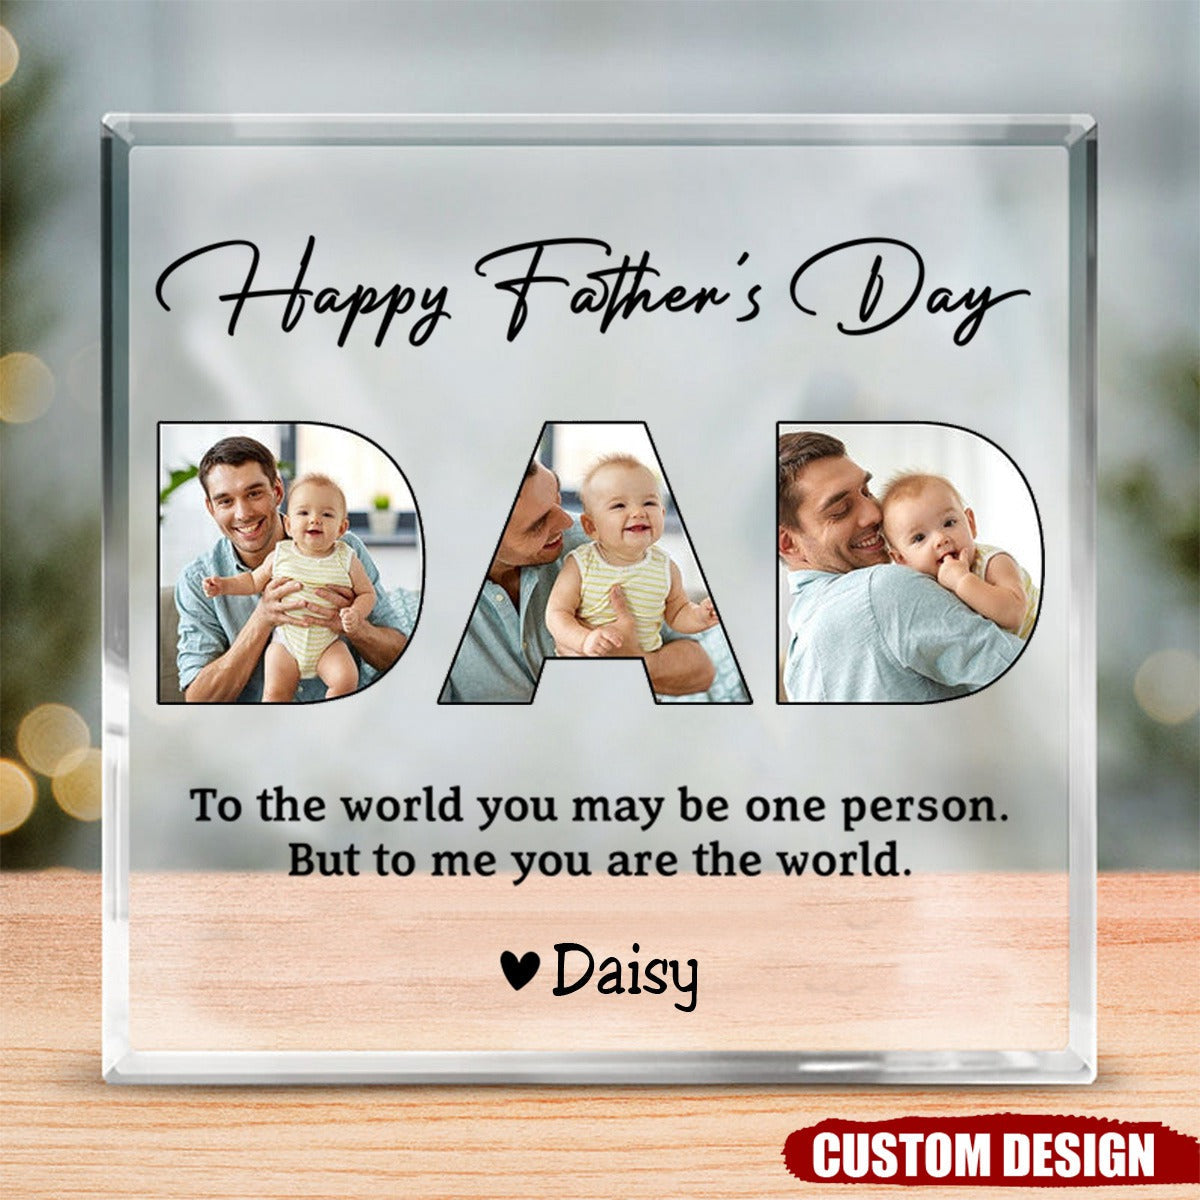 Dad, To Me You Are The World - Personalized Custom Square Shaped Acrylic Plaque - Gift For Dad, Father's Day Gift